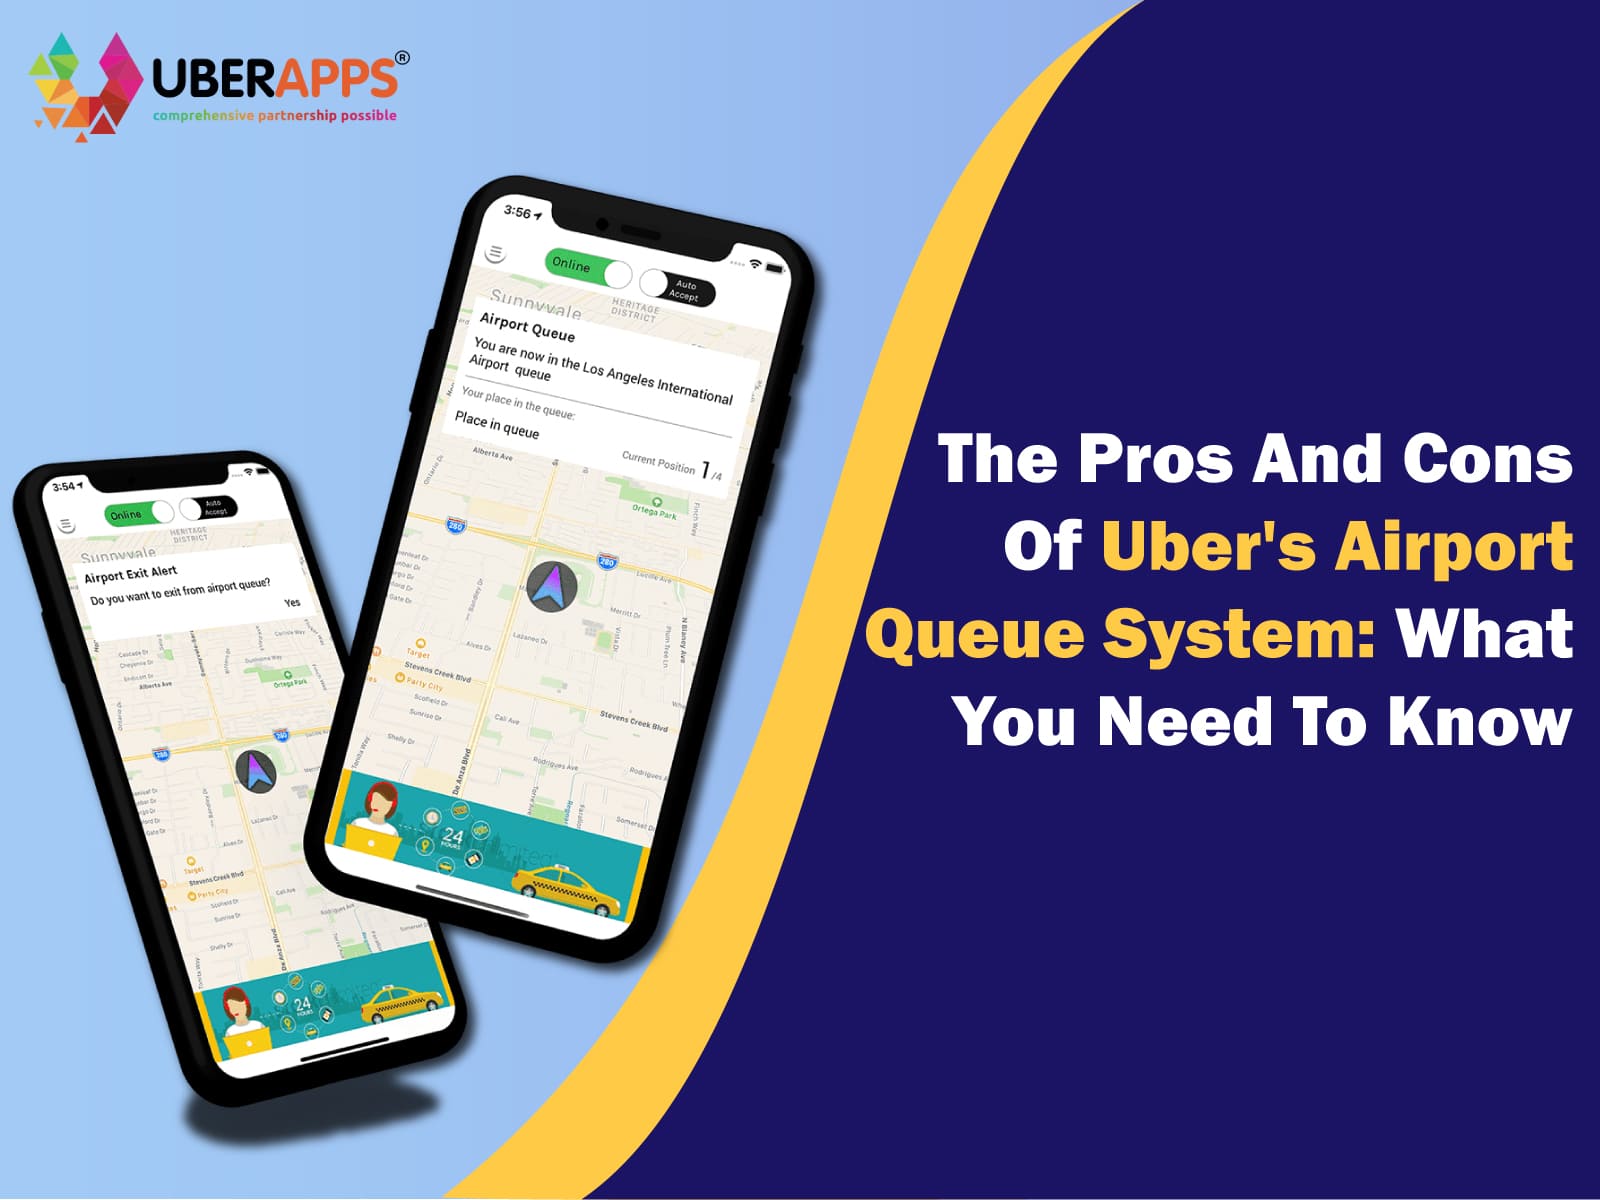  Pros And Cons Of Uber's Airport Queue